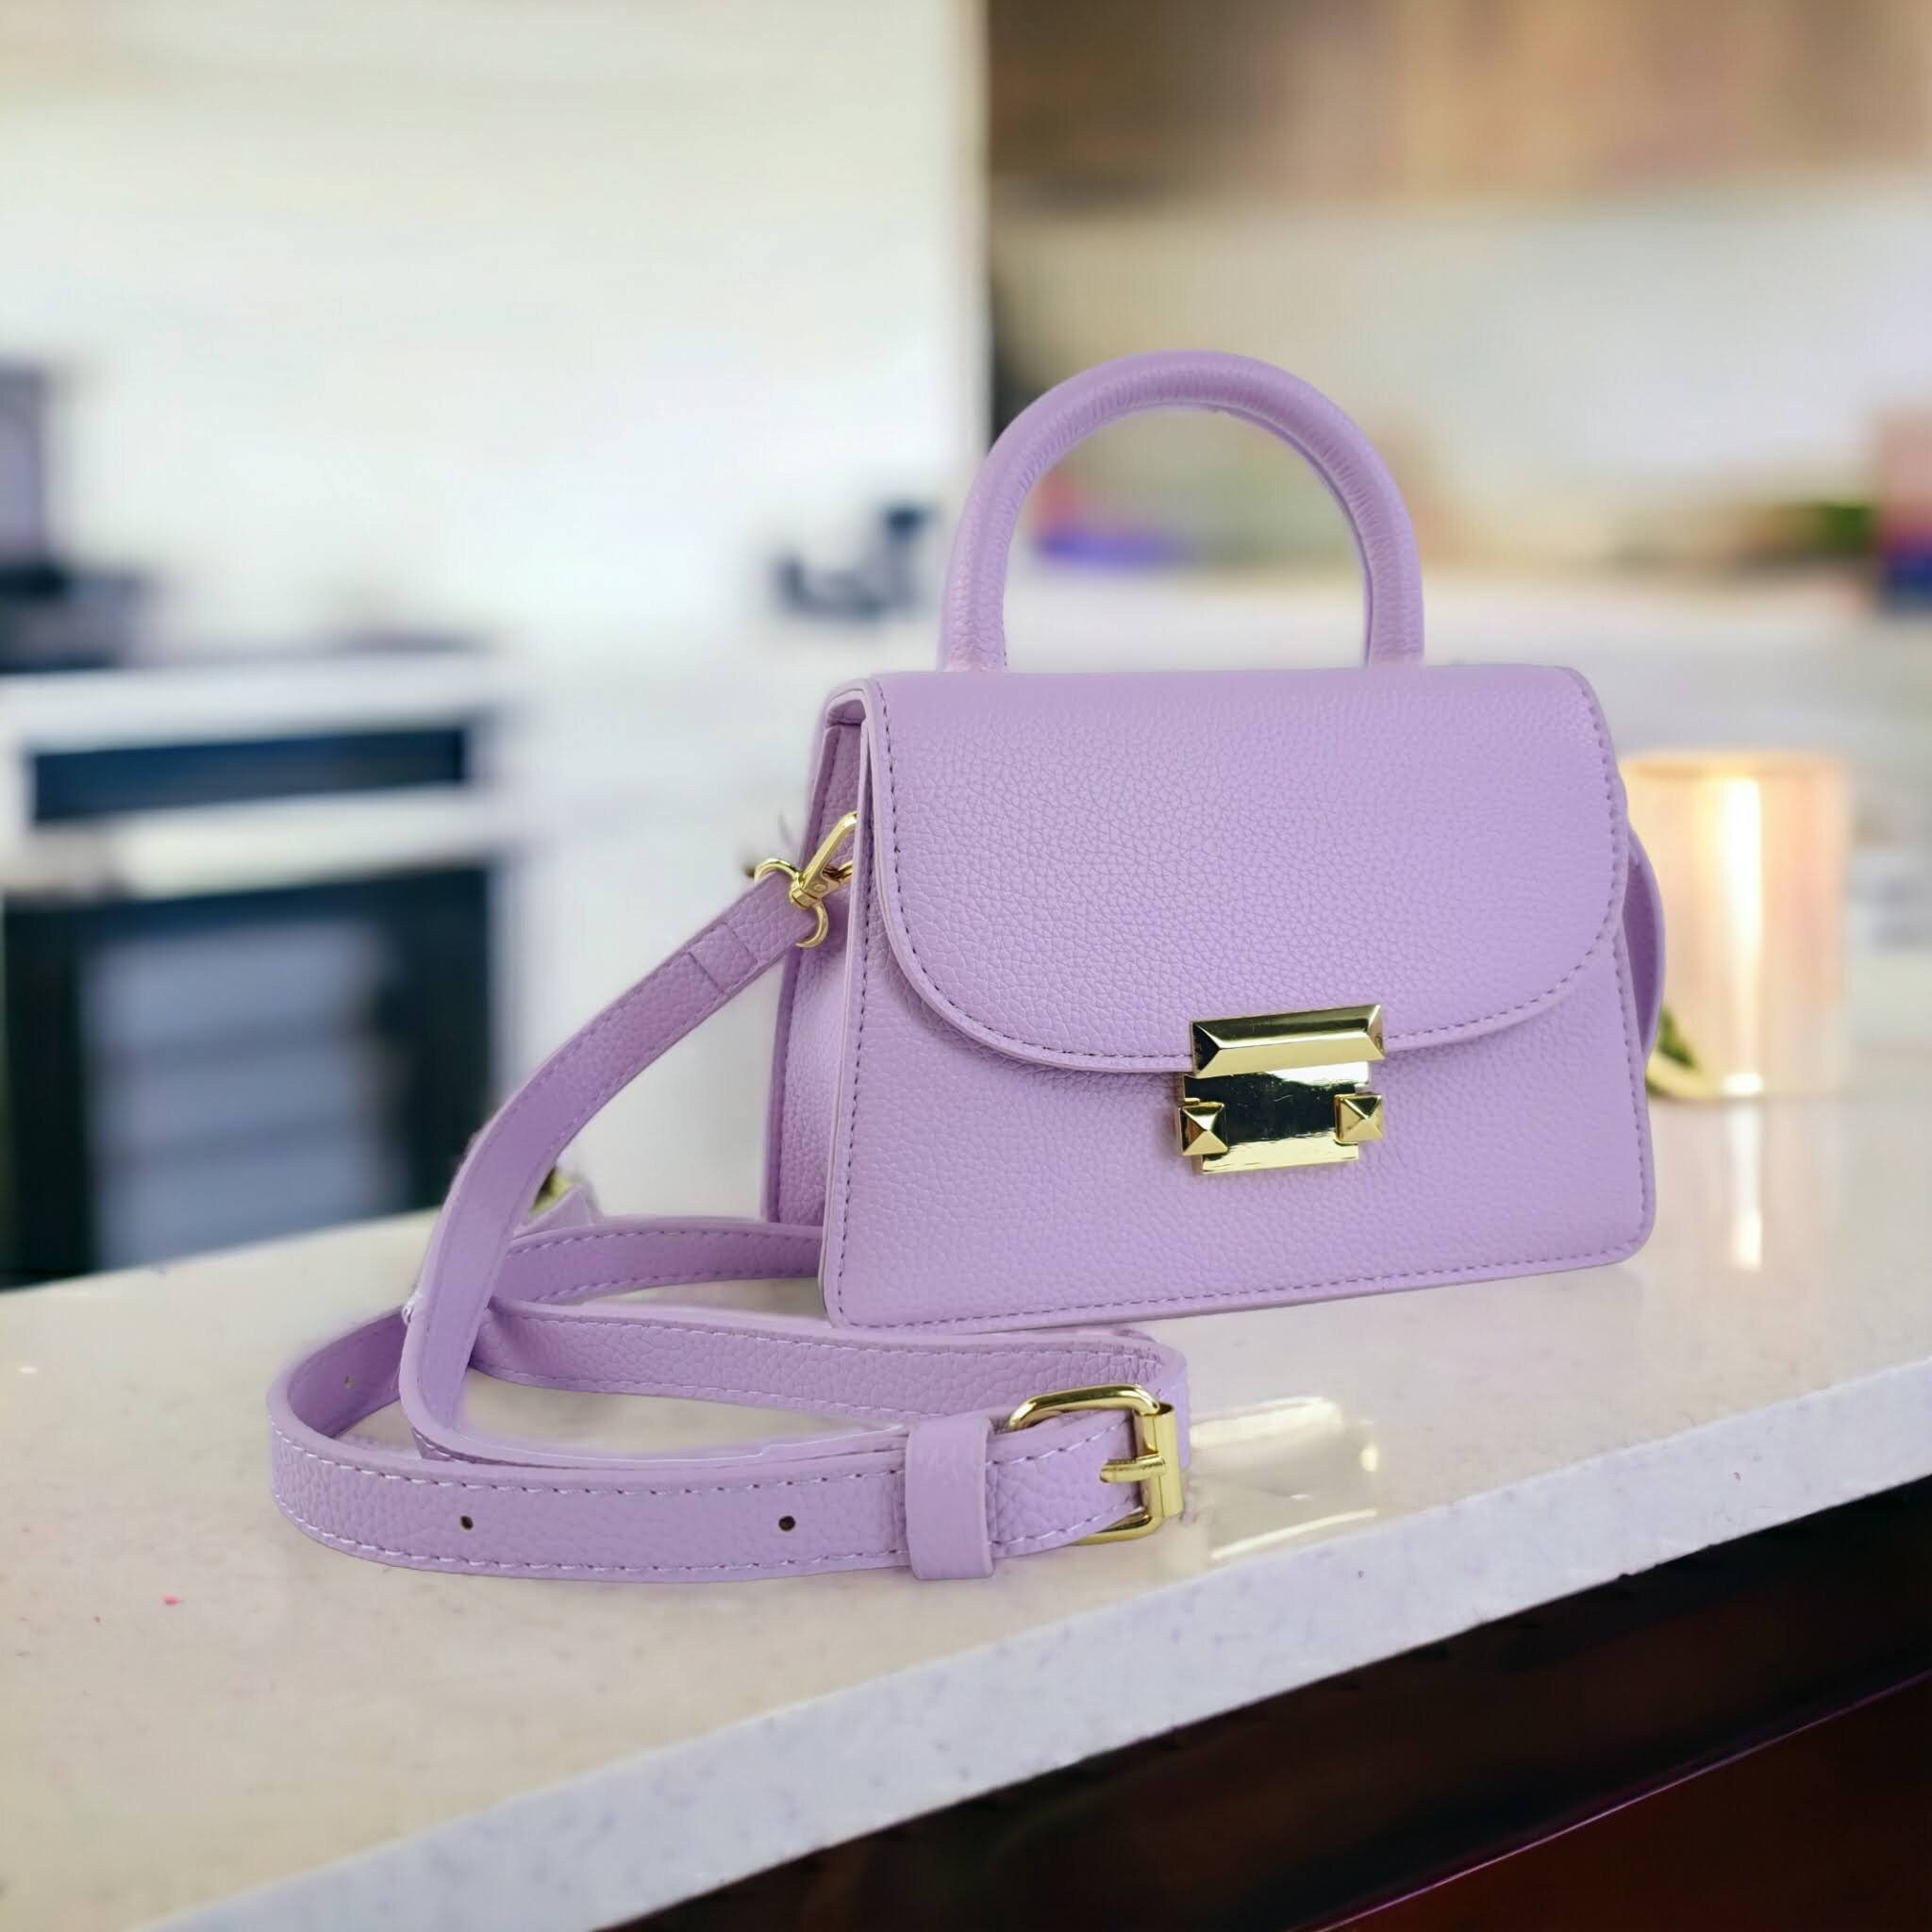 Casual Pure Leather Violet Purse||Girls Purse Violet Designs in my Latest  fashion beauty - YouTube